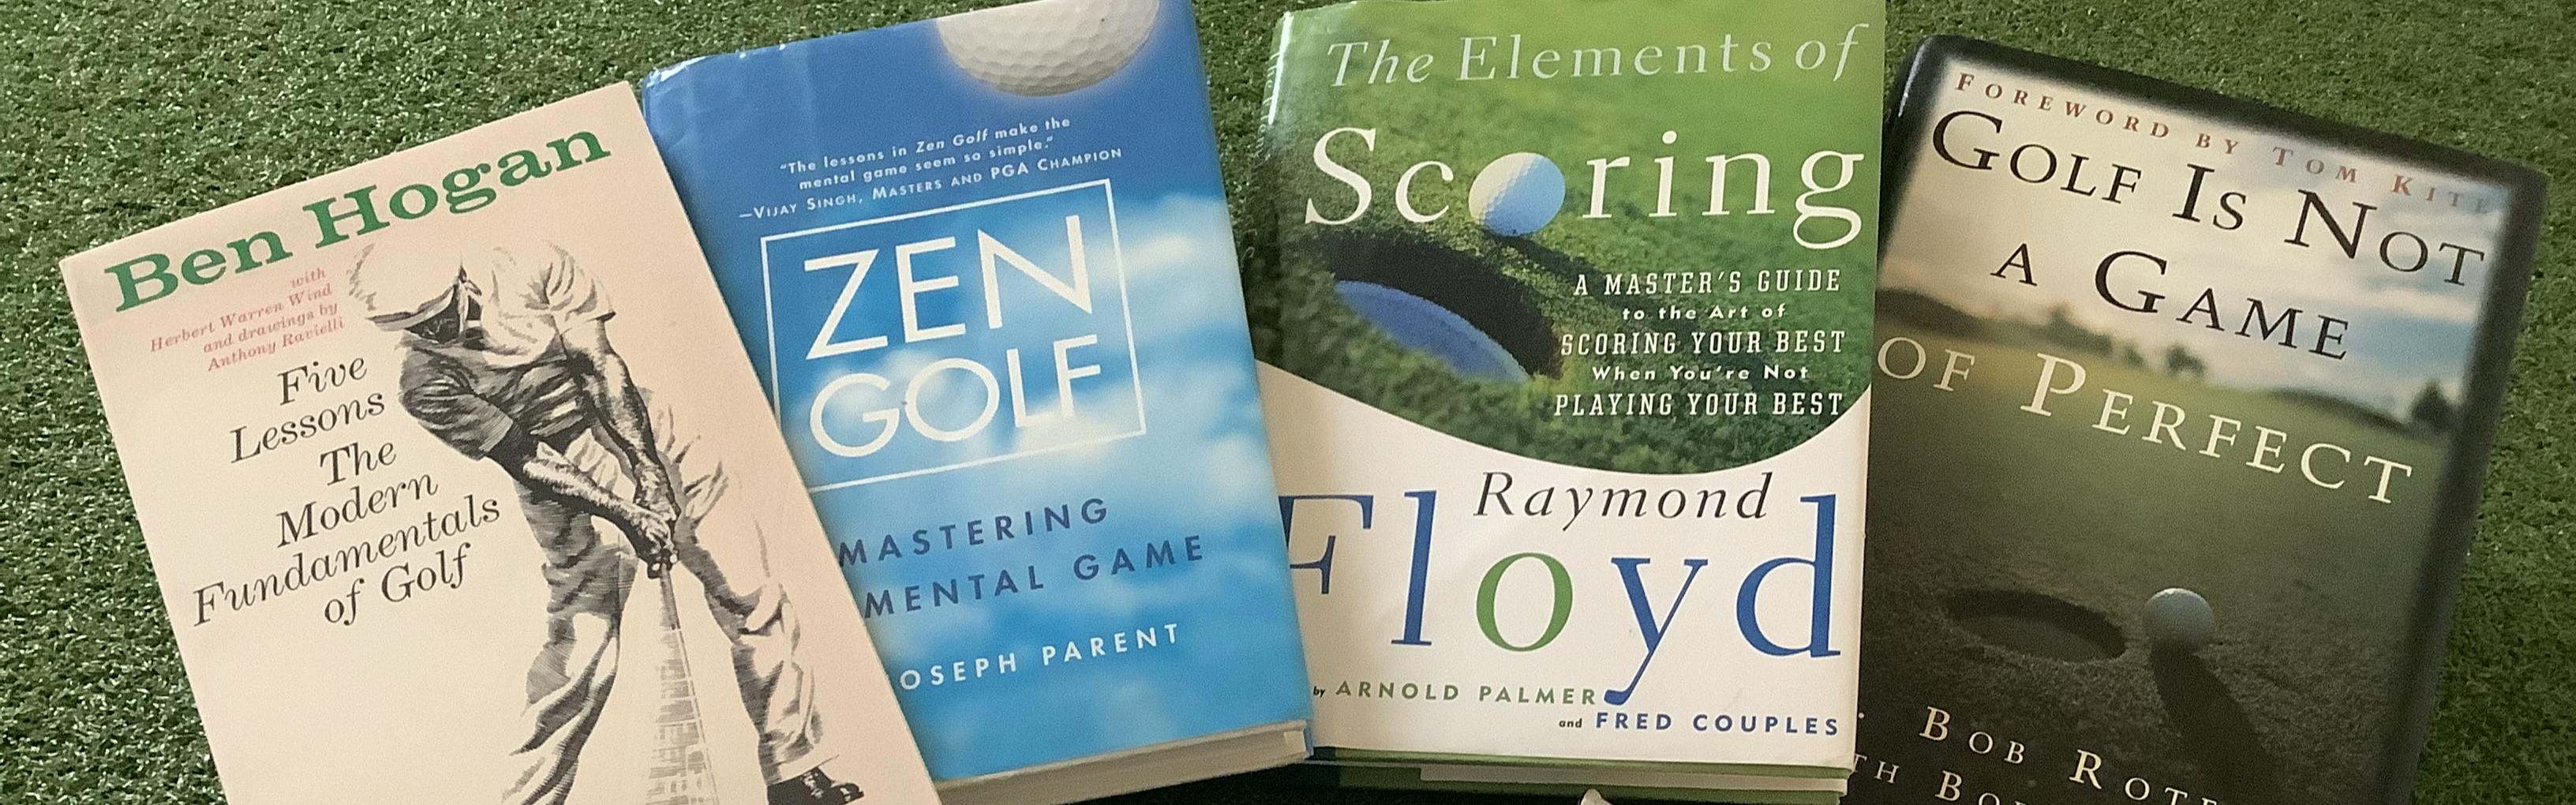 The 4 Best Golf Books A List of Our Favorites